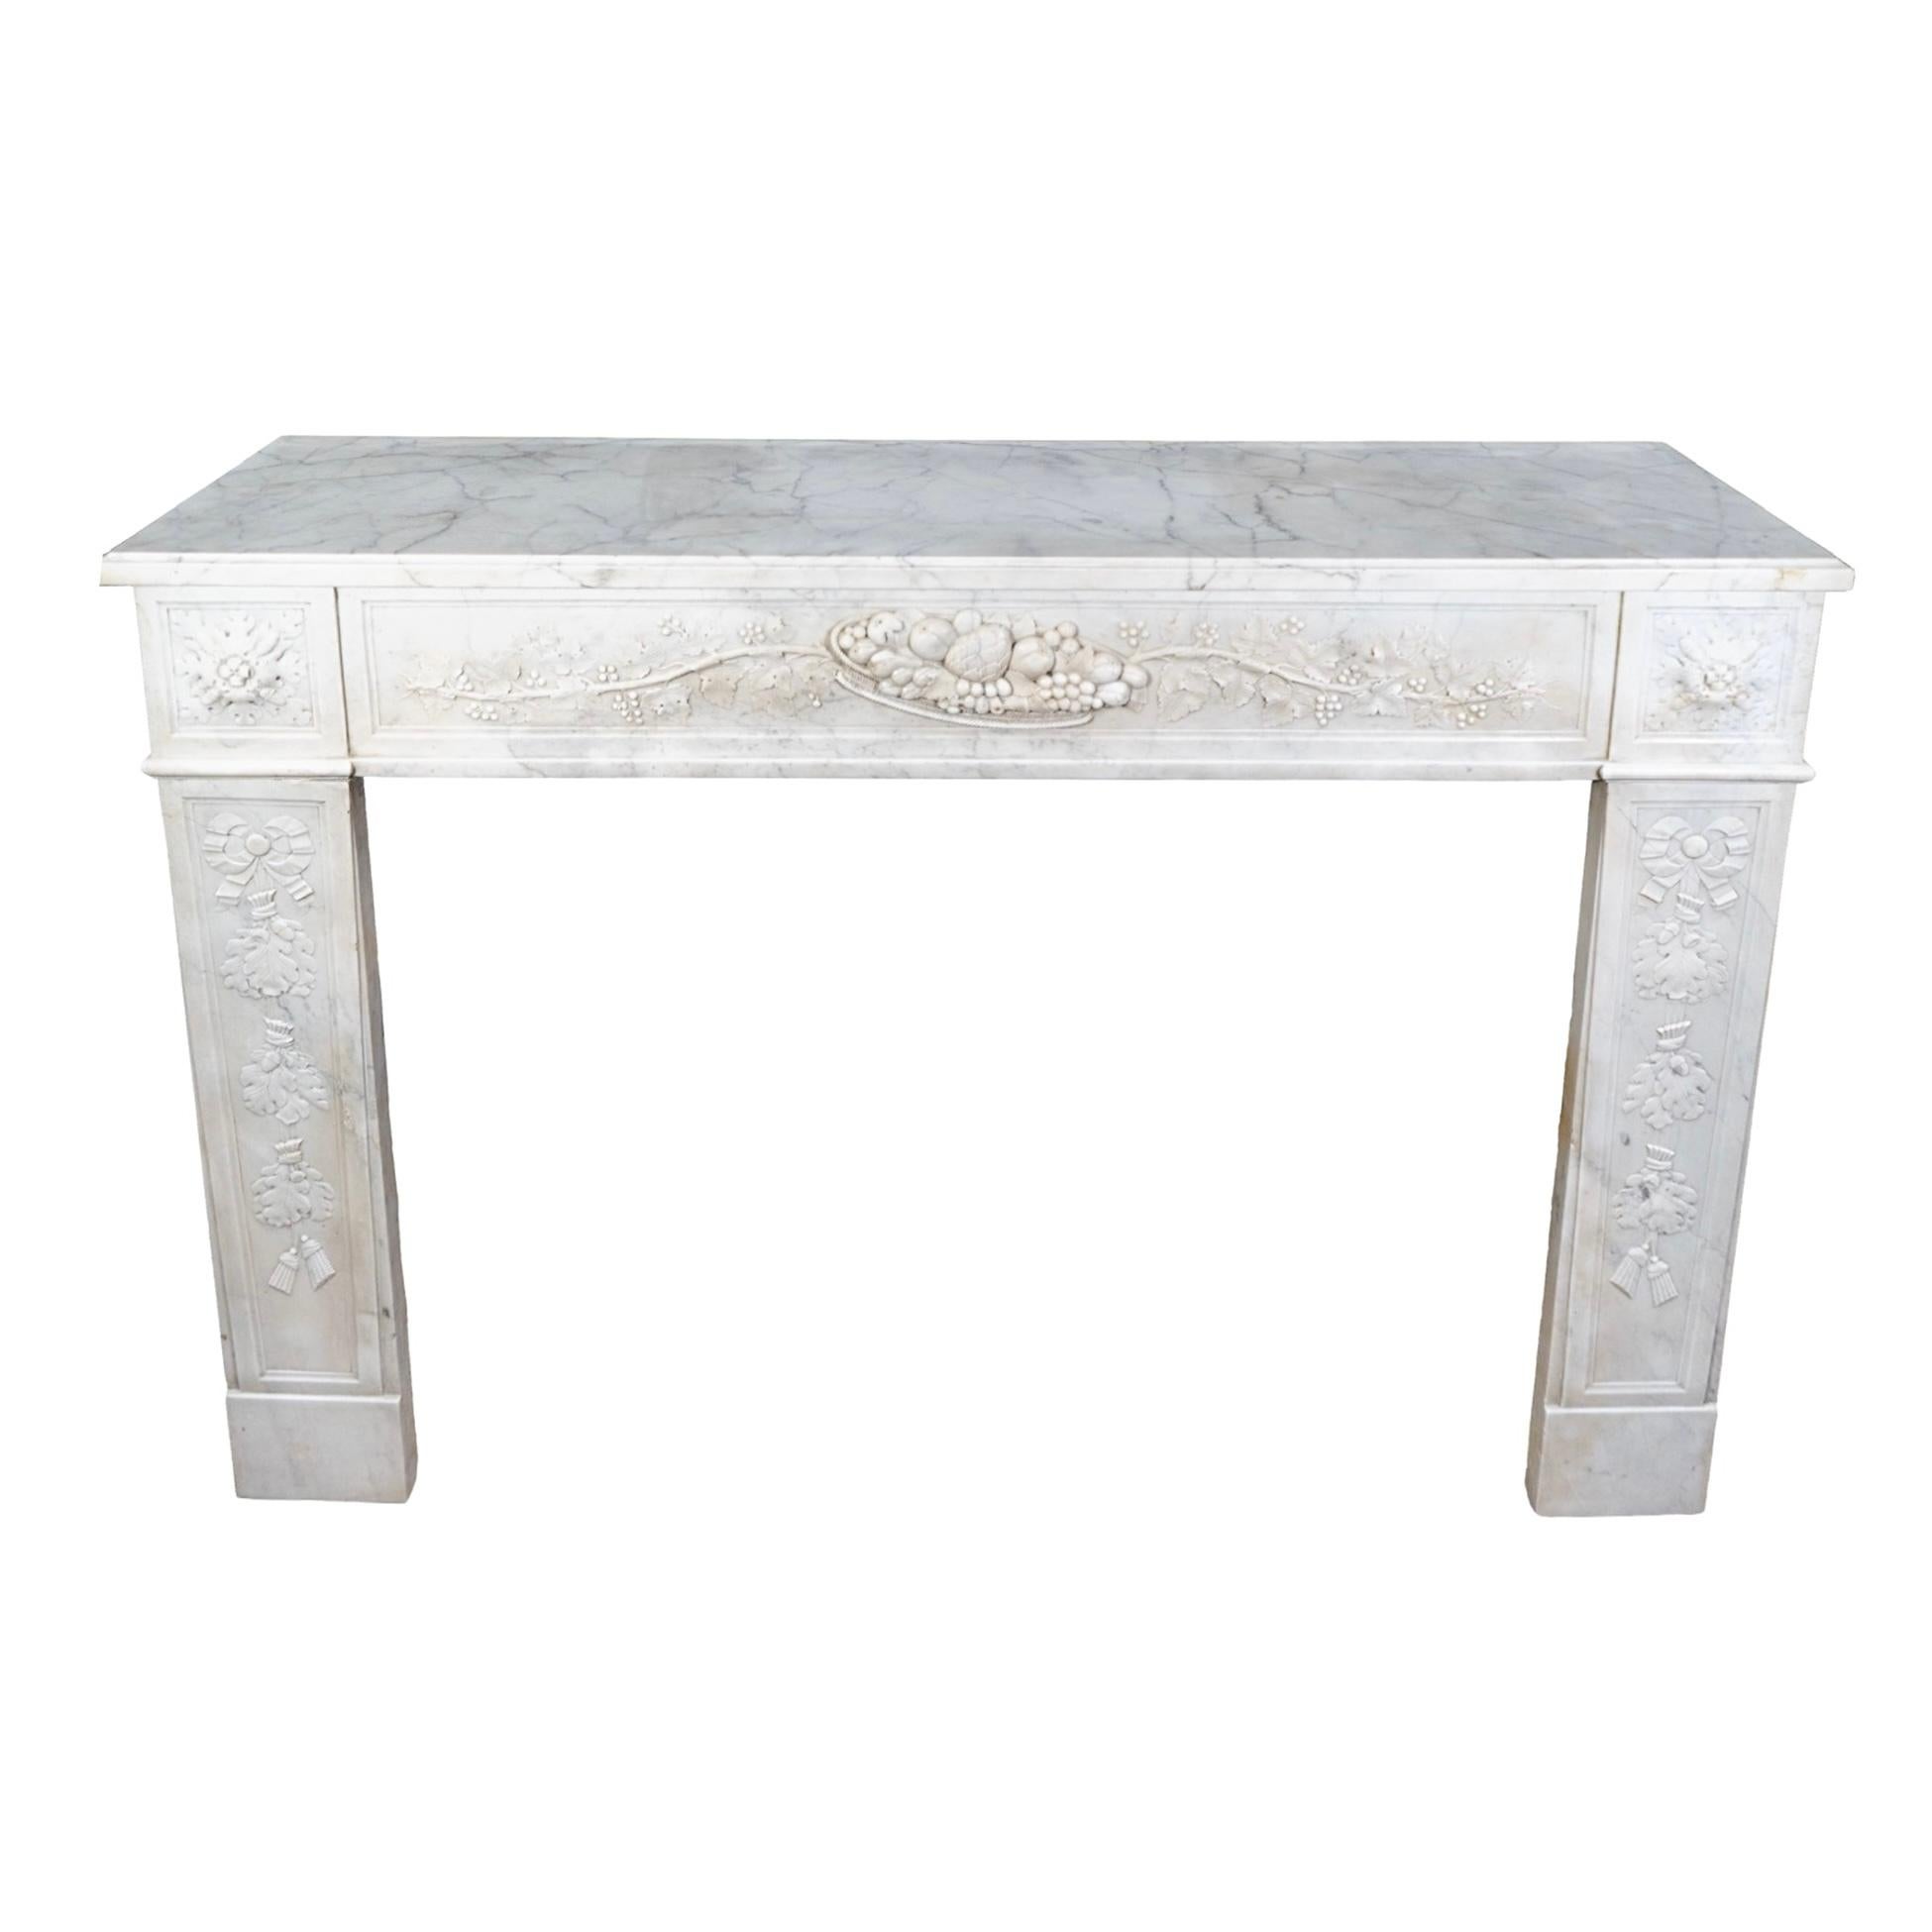 French White Veined Carrara Marble Mantel For Sale